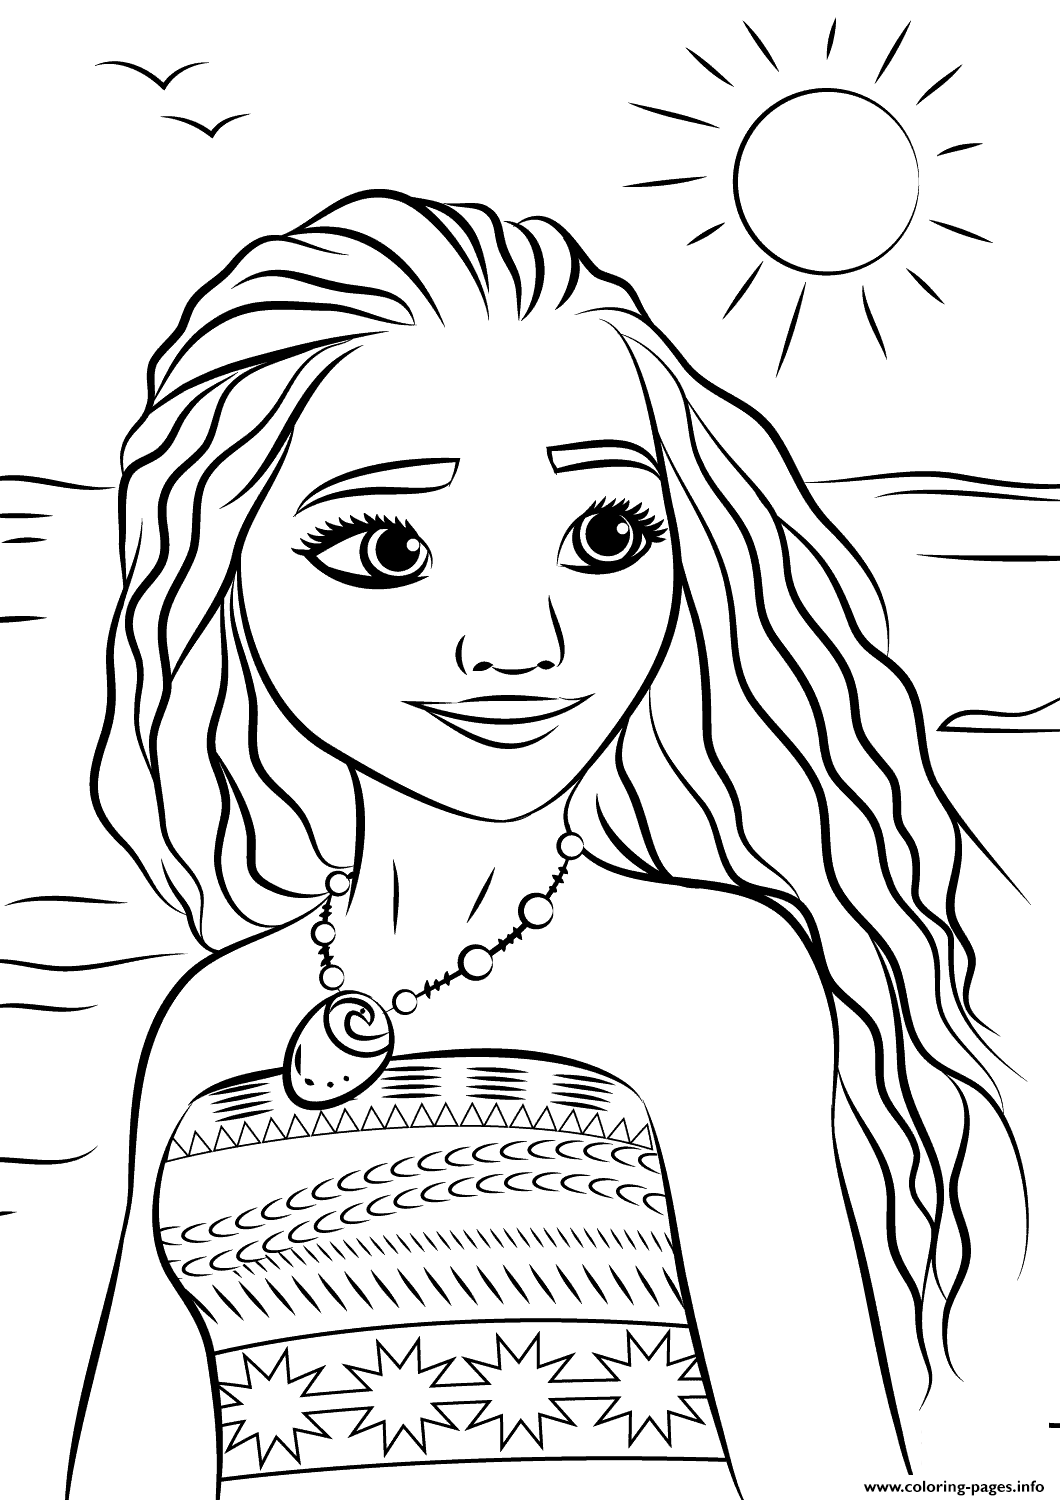 coloring pages that you can print for free print princess moana portrait disney coloring pages that can pages for you free print coloring 